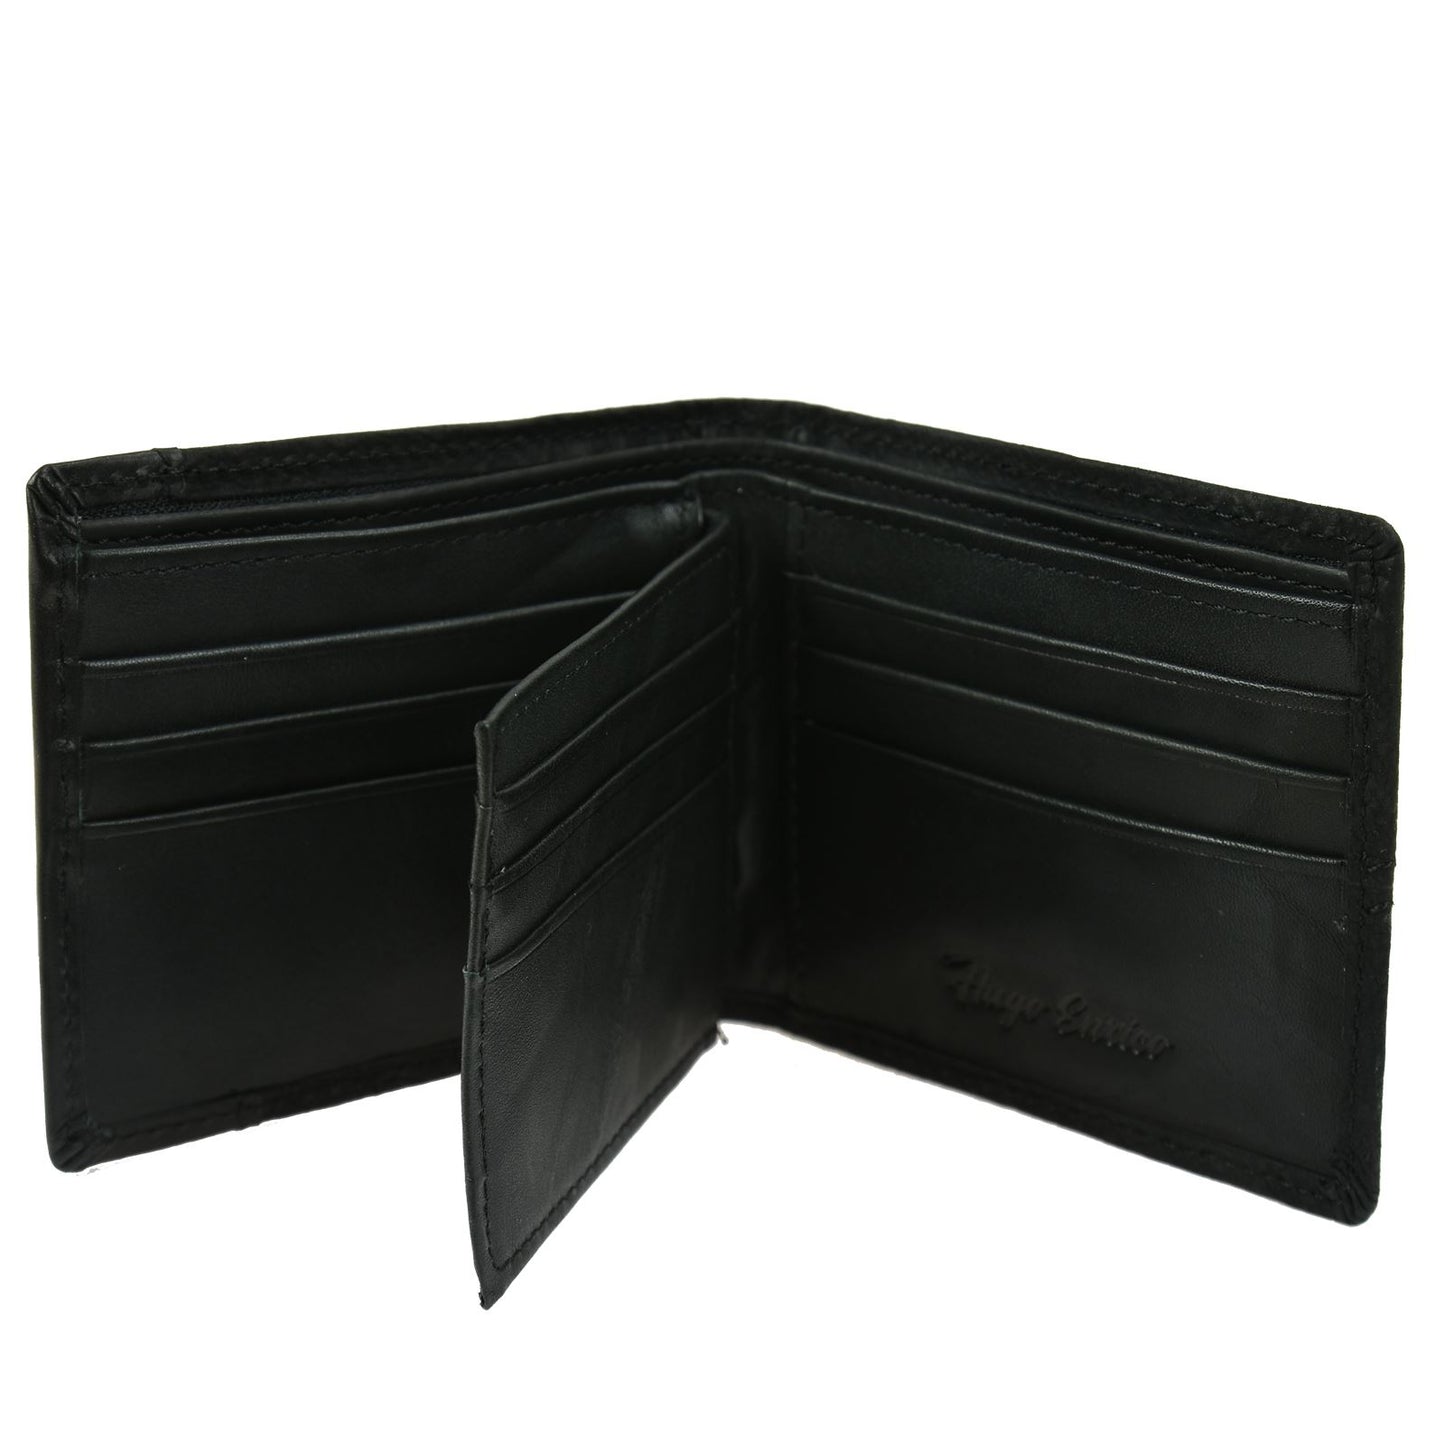 Double the Style with a Front Stitch Wallet